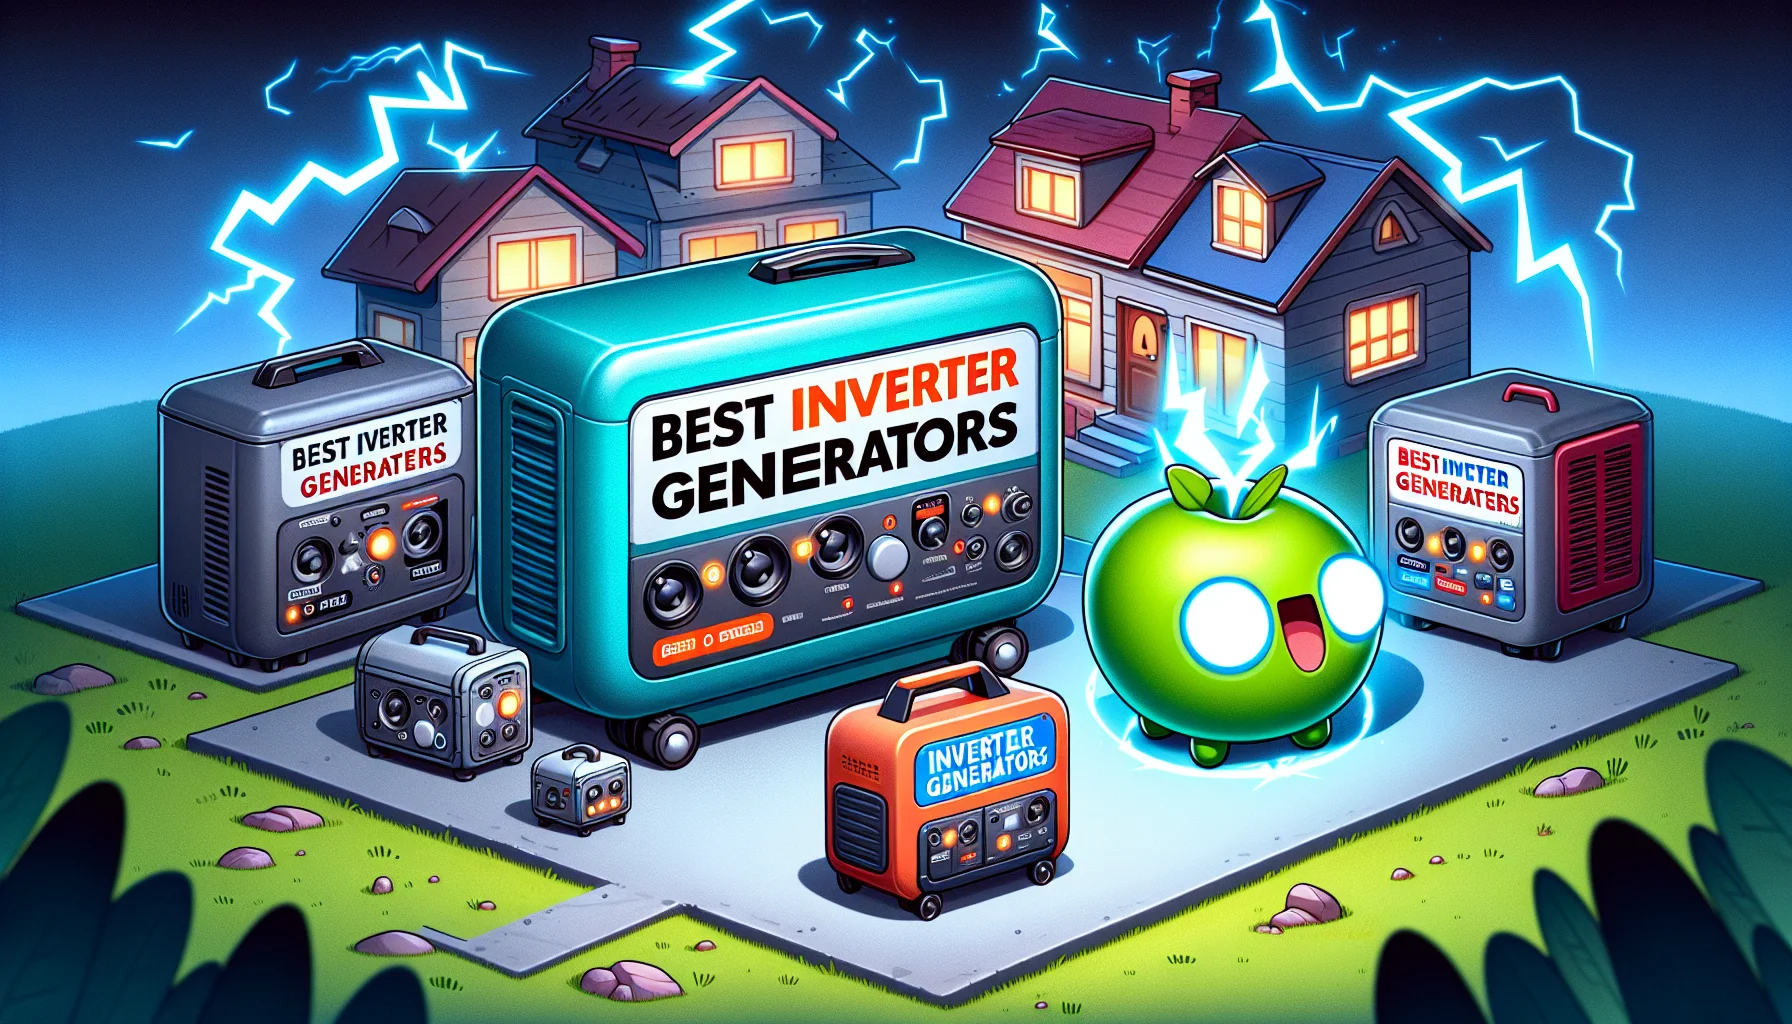 A cartoon-style image showcasing a list of the 'Best Inverter Generators'. These generators vary in size, shape, and color, each containing a playful label with a catchy and funny tagline related to electricity generation. The largest generator is turquoise and resembling of a friendly robot with a surprised expression, while the smallest one, in a comical twist, is a tiny, cute, apple-green generator sparkling with electricity. The background scene depicts an animated suburb with a power blackout, and contrastingly, one house in the center, powered by these humorous inverter generators, is brightly illuminated, drawing attention towards it and emphasizing the importance of these generators.